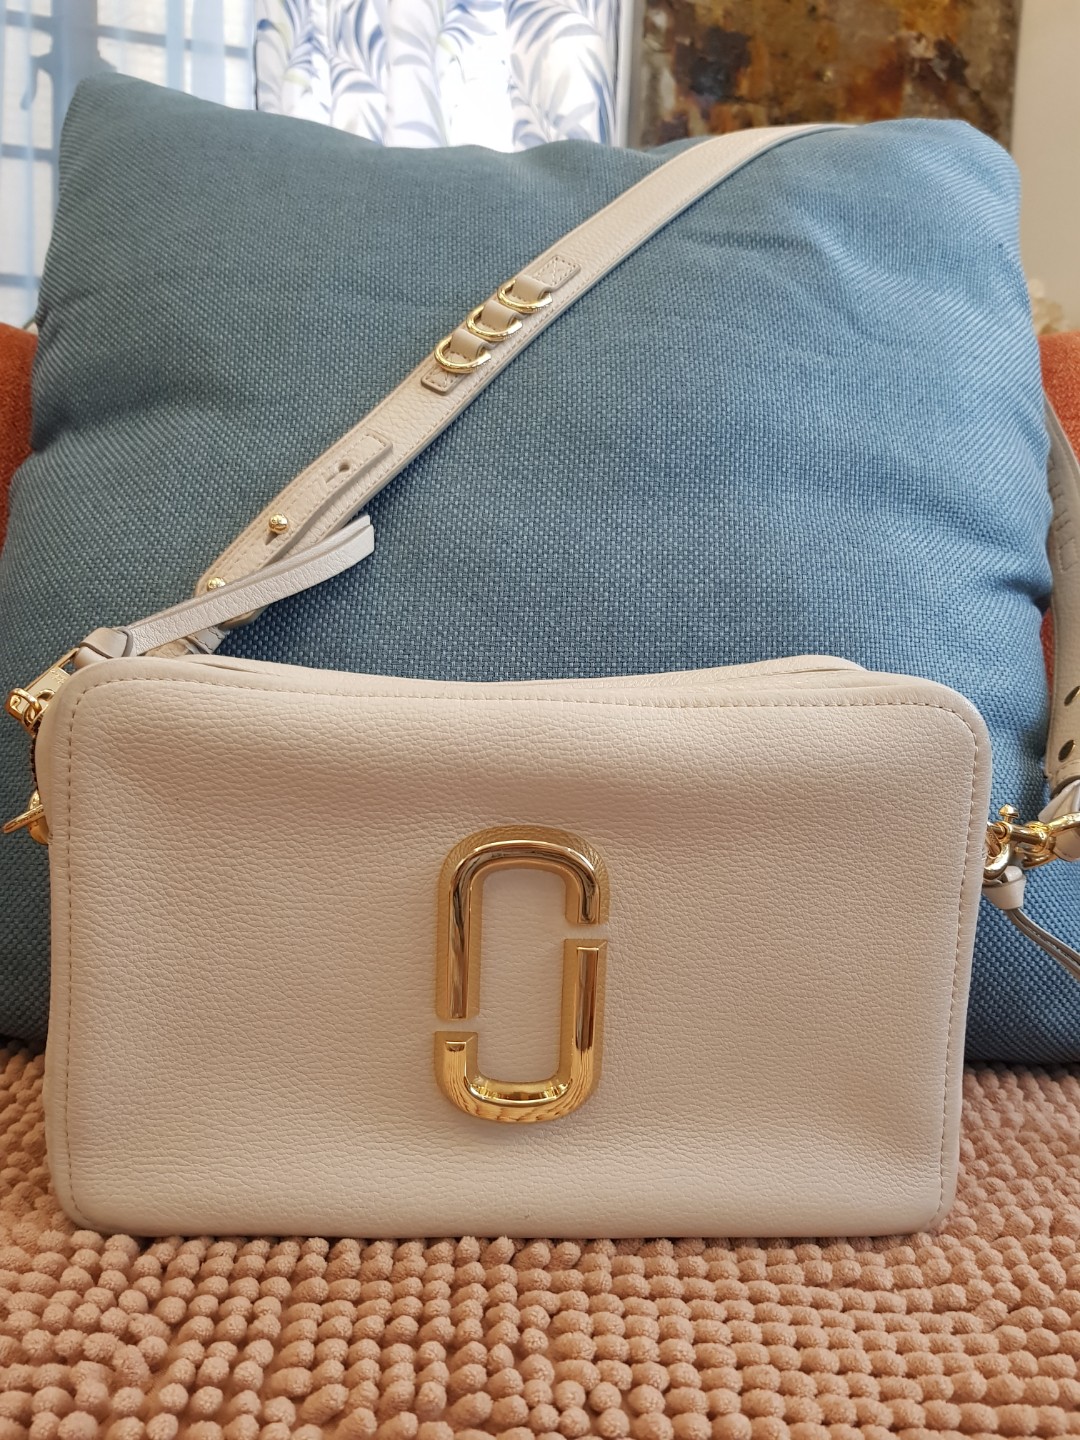 Review on Marc Jacobs soft shot vs snap shot bags 